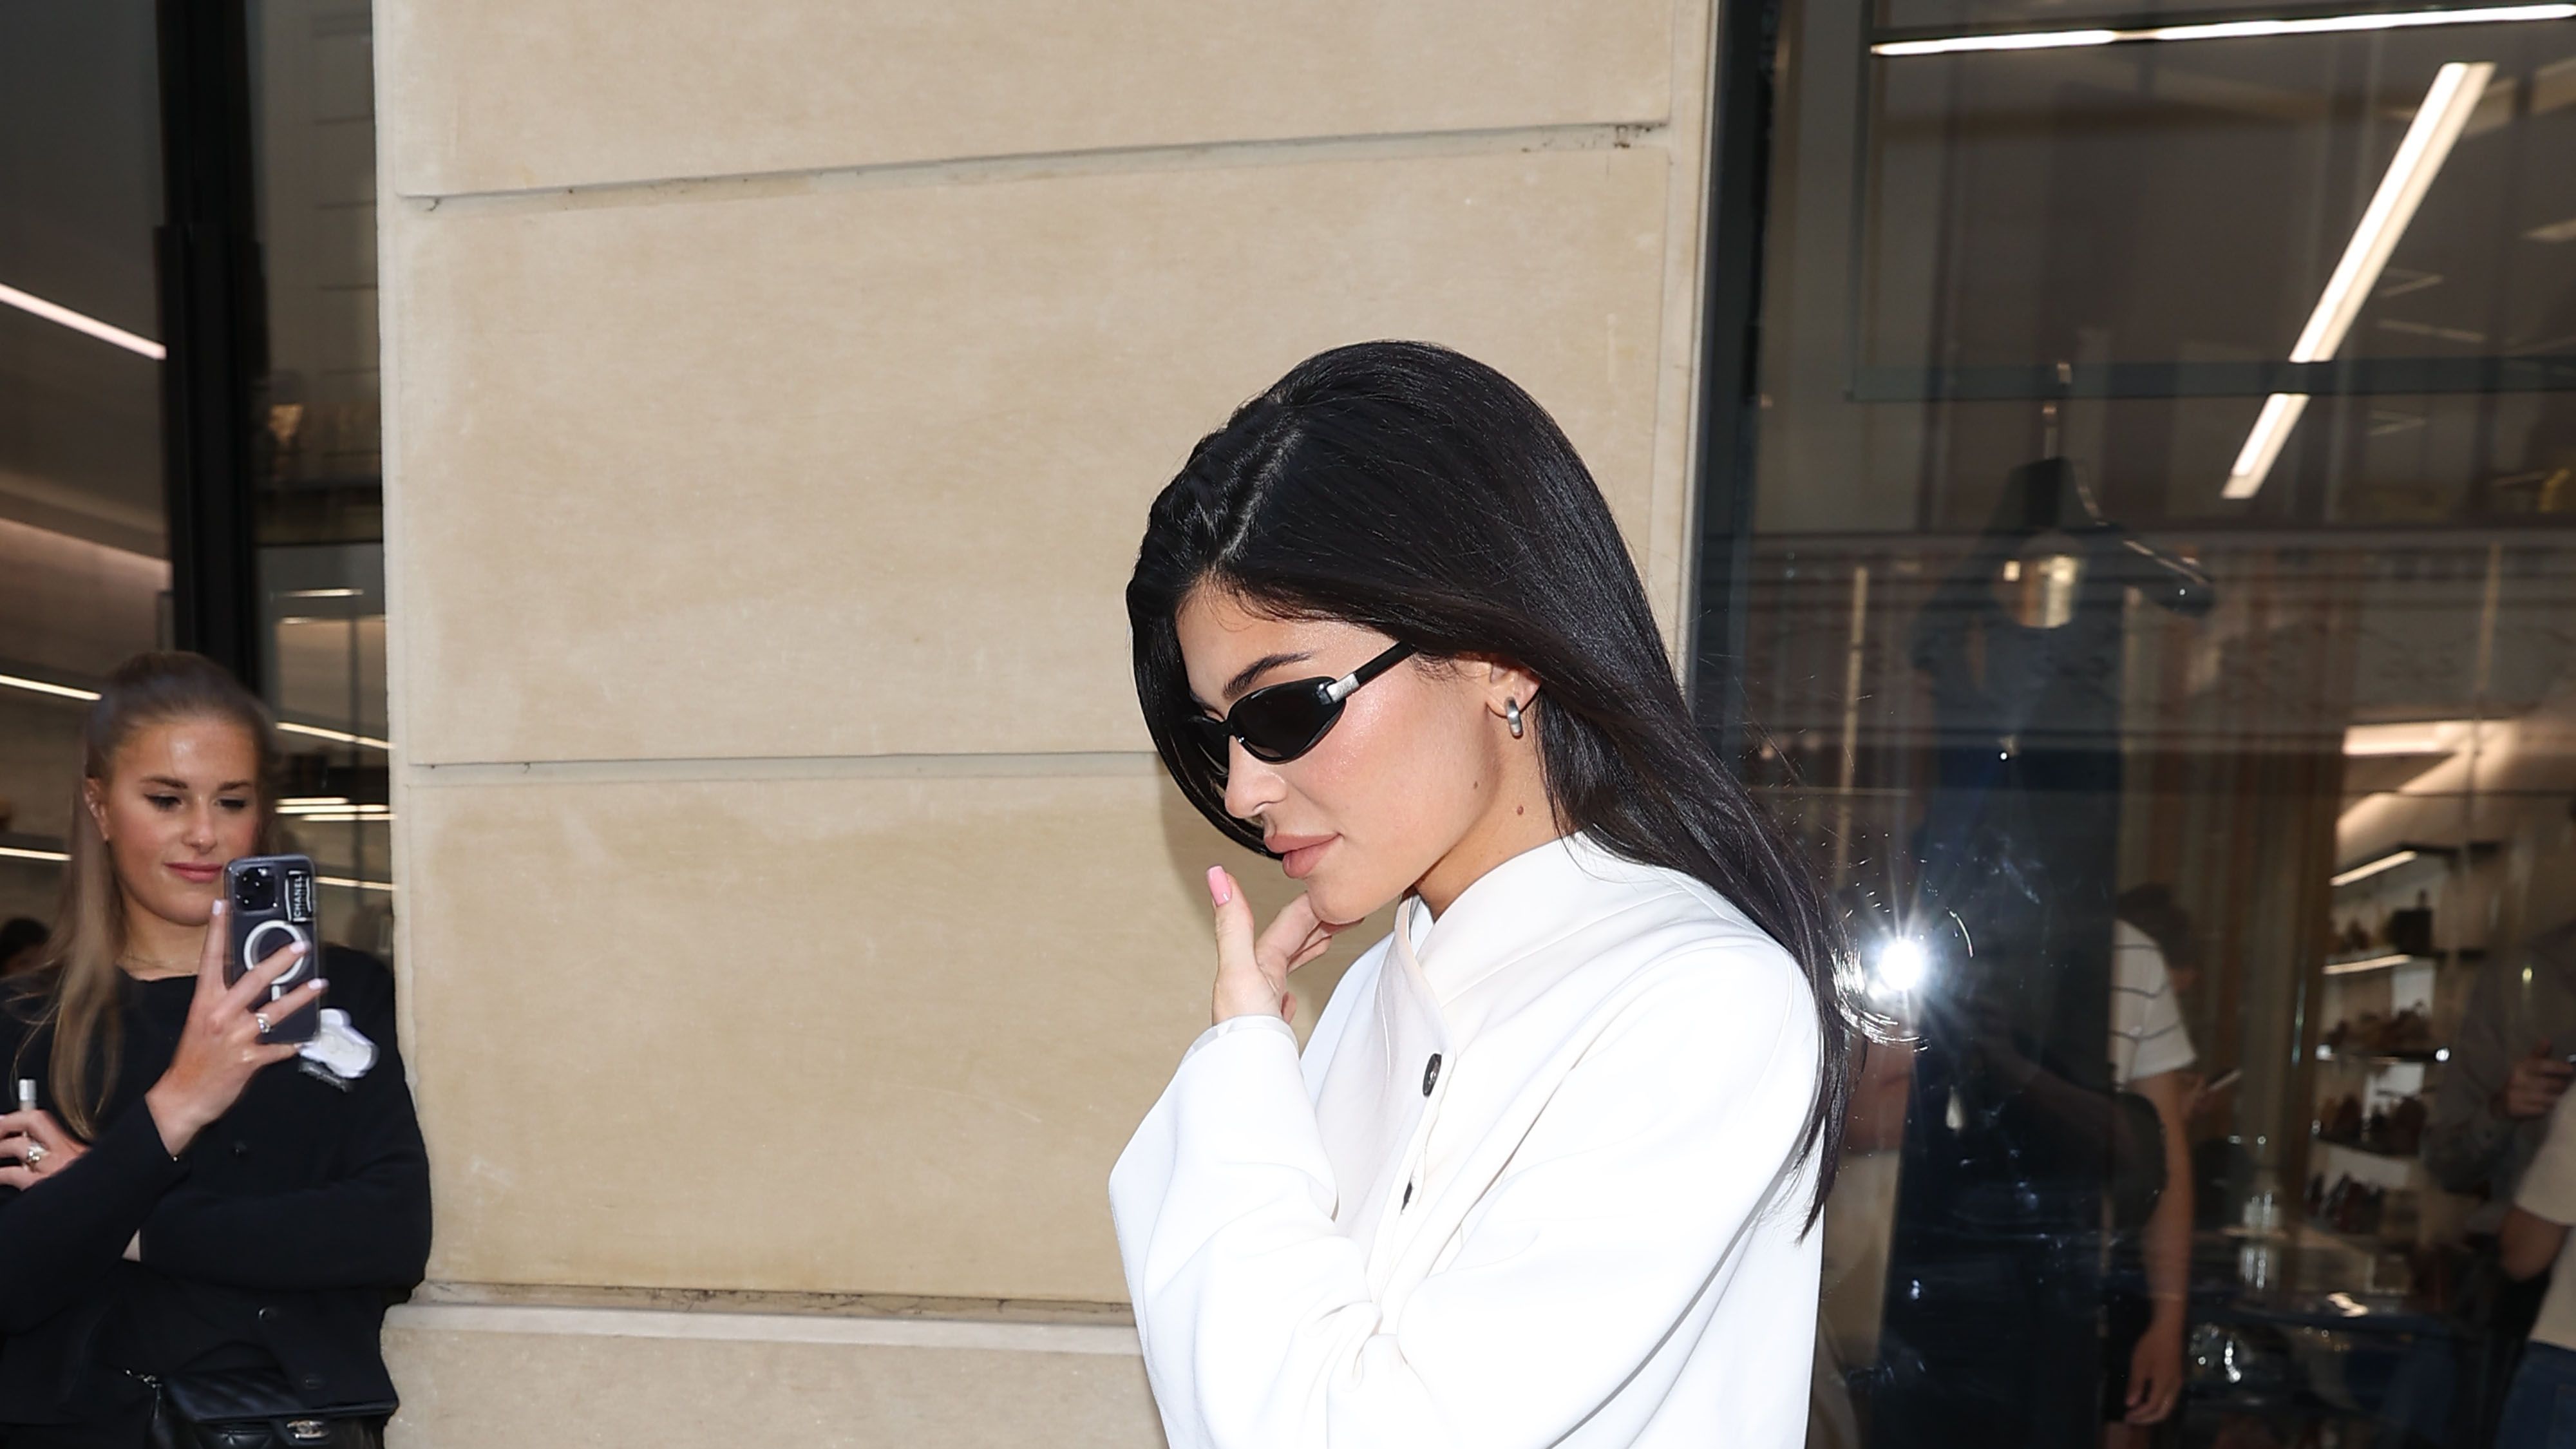 Kylie Jenner Wears Micro Mini Dress and Black Coat in NYC